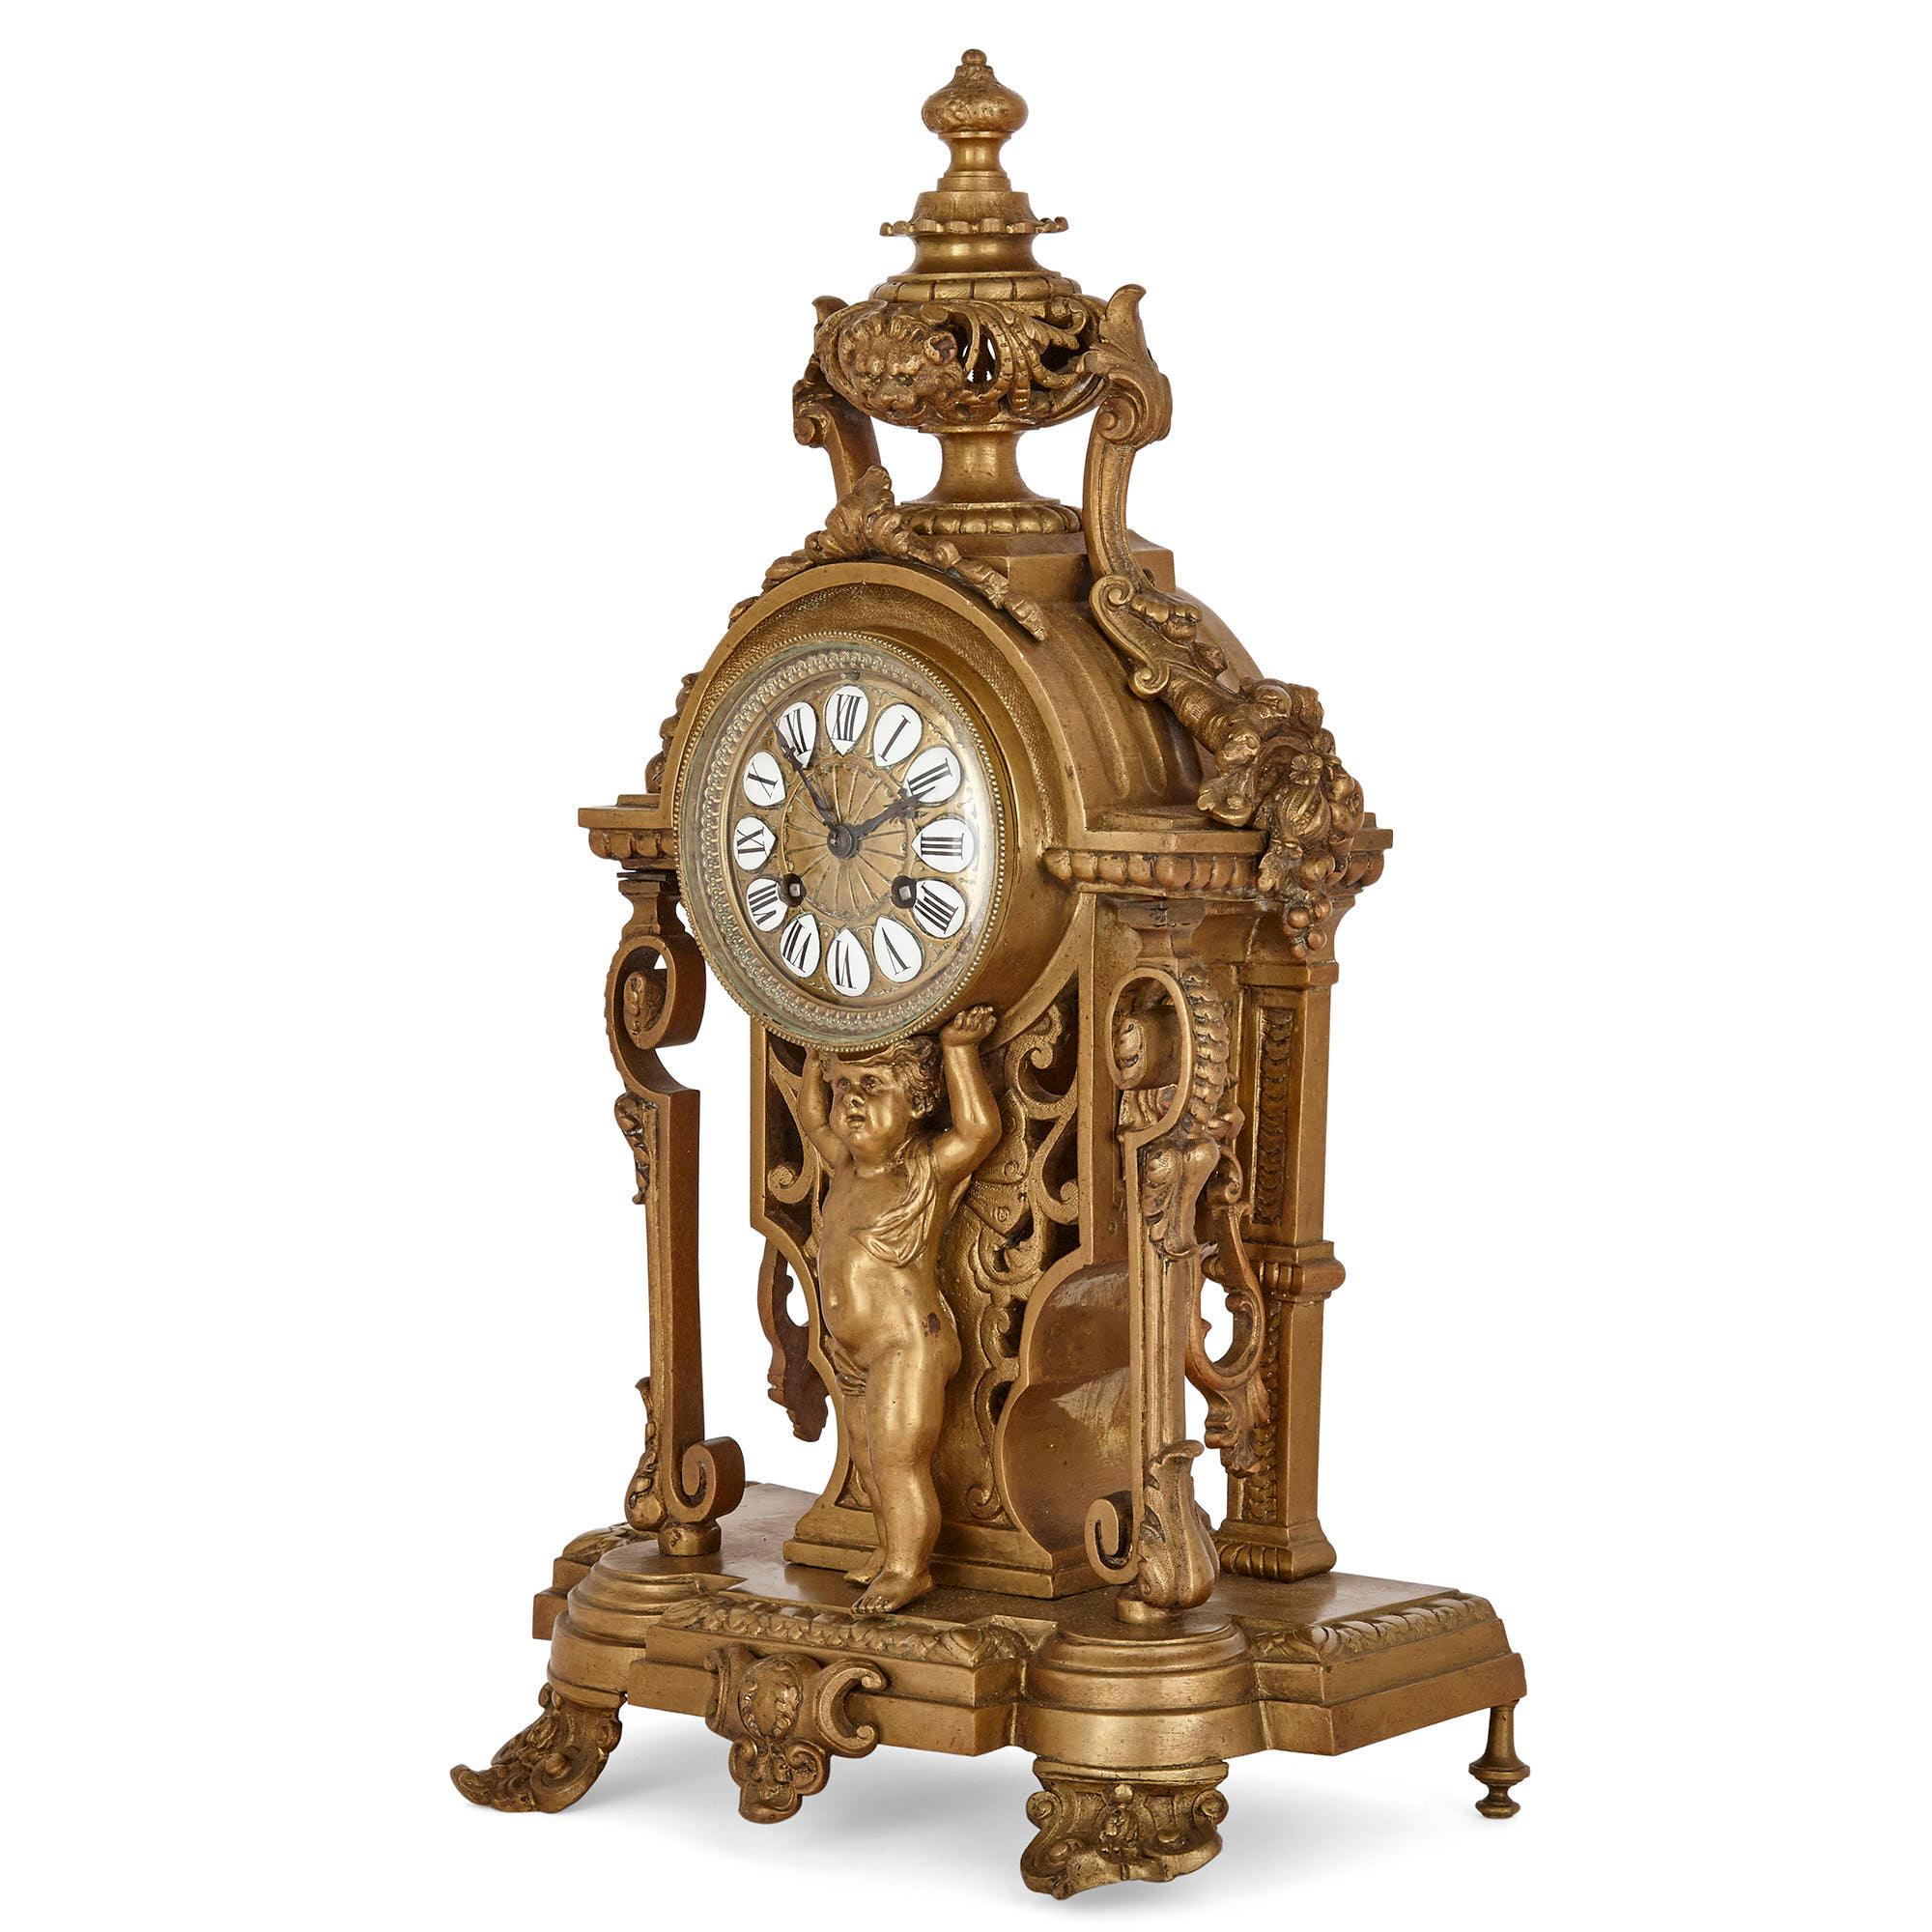 This clock set contains a mantel clock and a pair of candelabra. Unusually, the clock and candelabra are constructed entirely of gilt bronze. The bronze dial of the mantel clock is inscribed with Roman numeral hours on separate enamel cartouches.